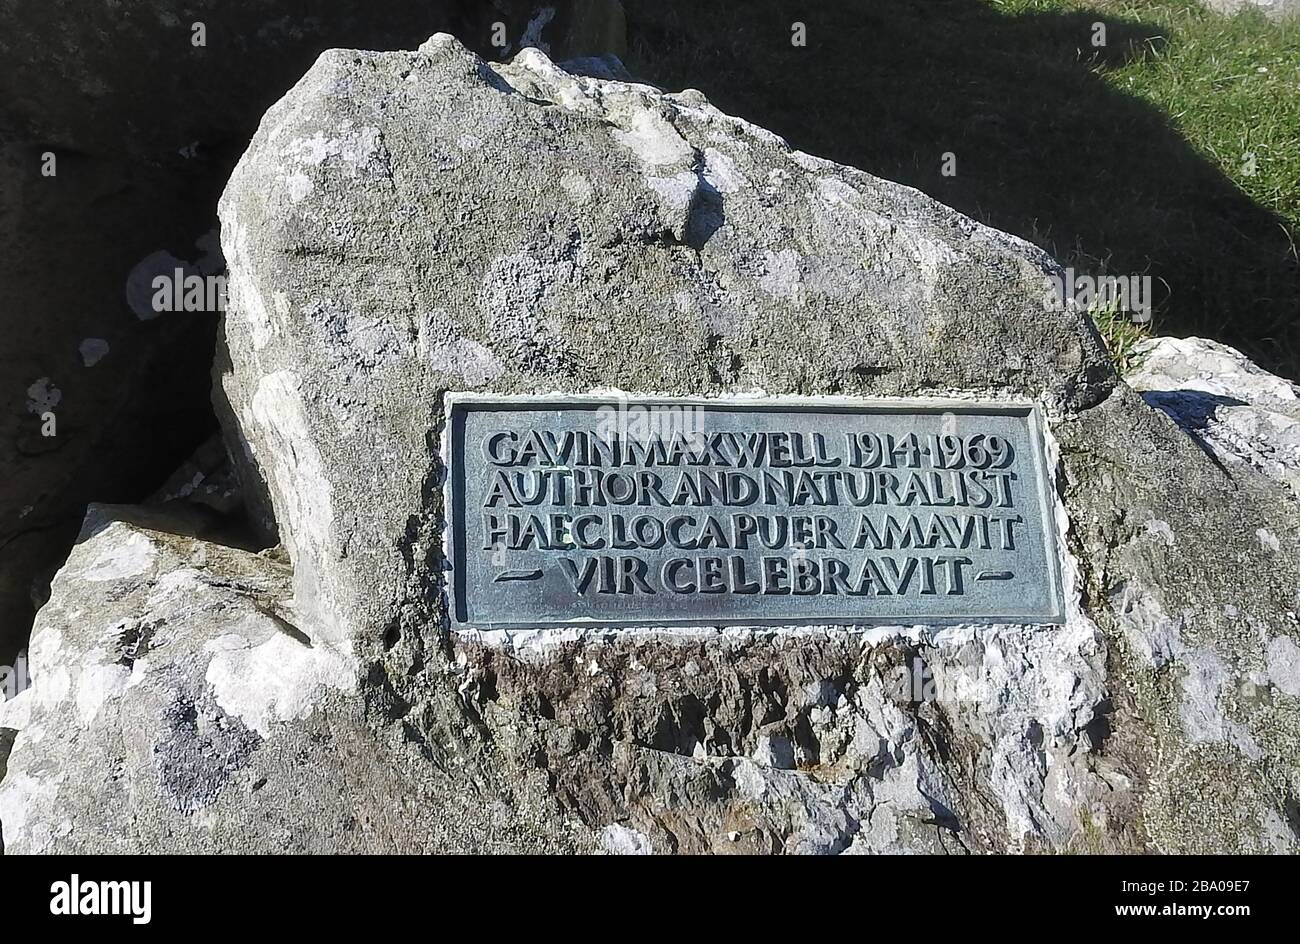 Maxwells Otter - A memorial plaque (Near the otter statue) to author and naturalist Gavin Maxwell 1914-1969, author of the book and later film 'Ring of Bright Water' near Monrieth, Wigtownshire, Scotland. The otter statue looks out over Front Bay Stock Photo